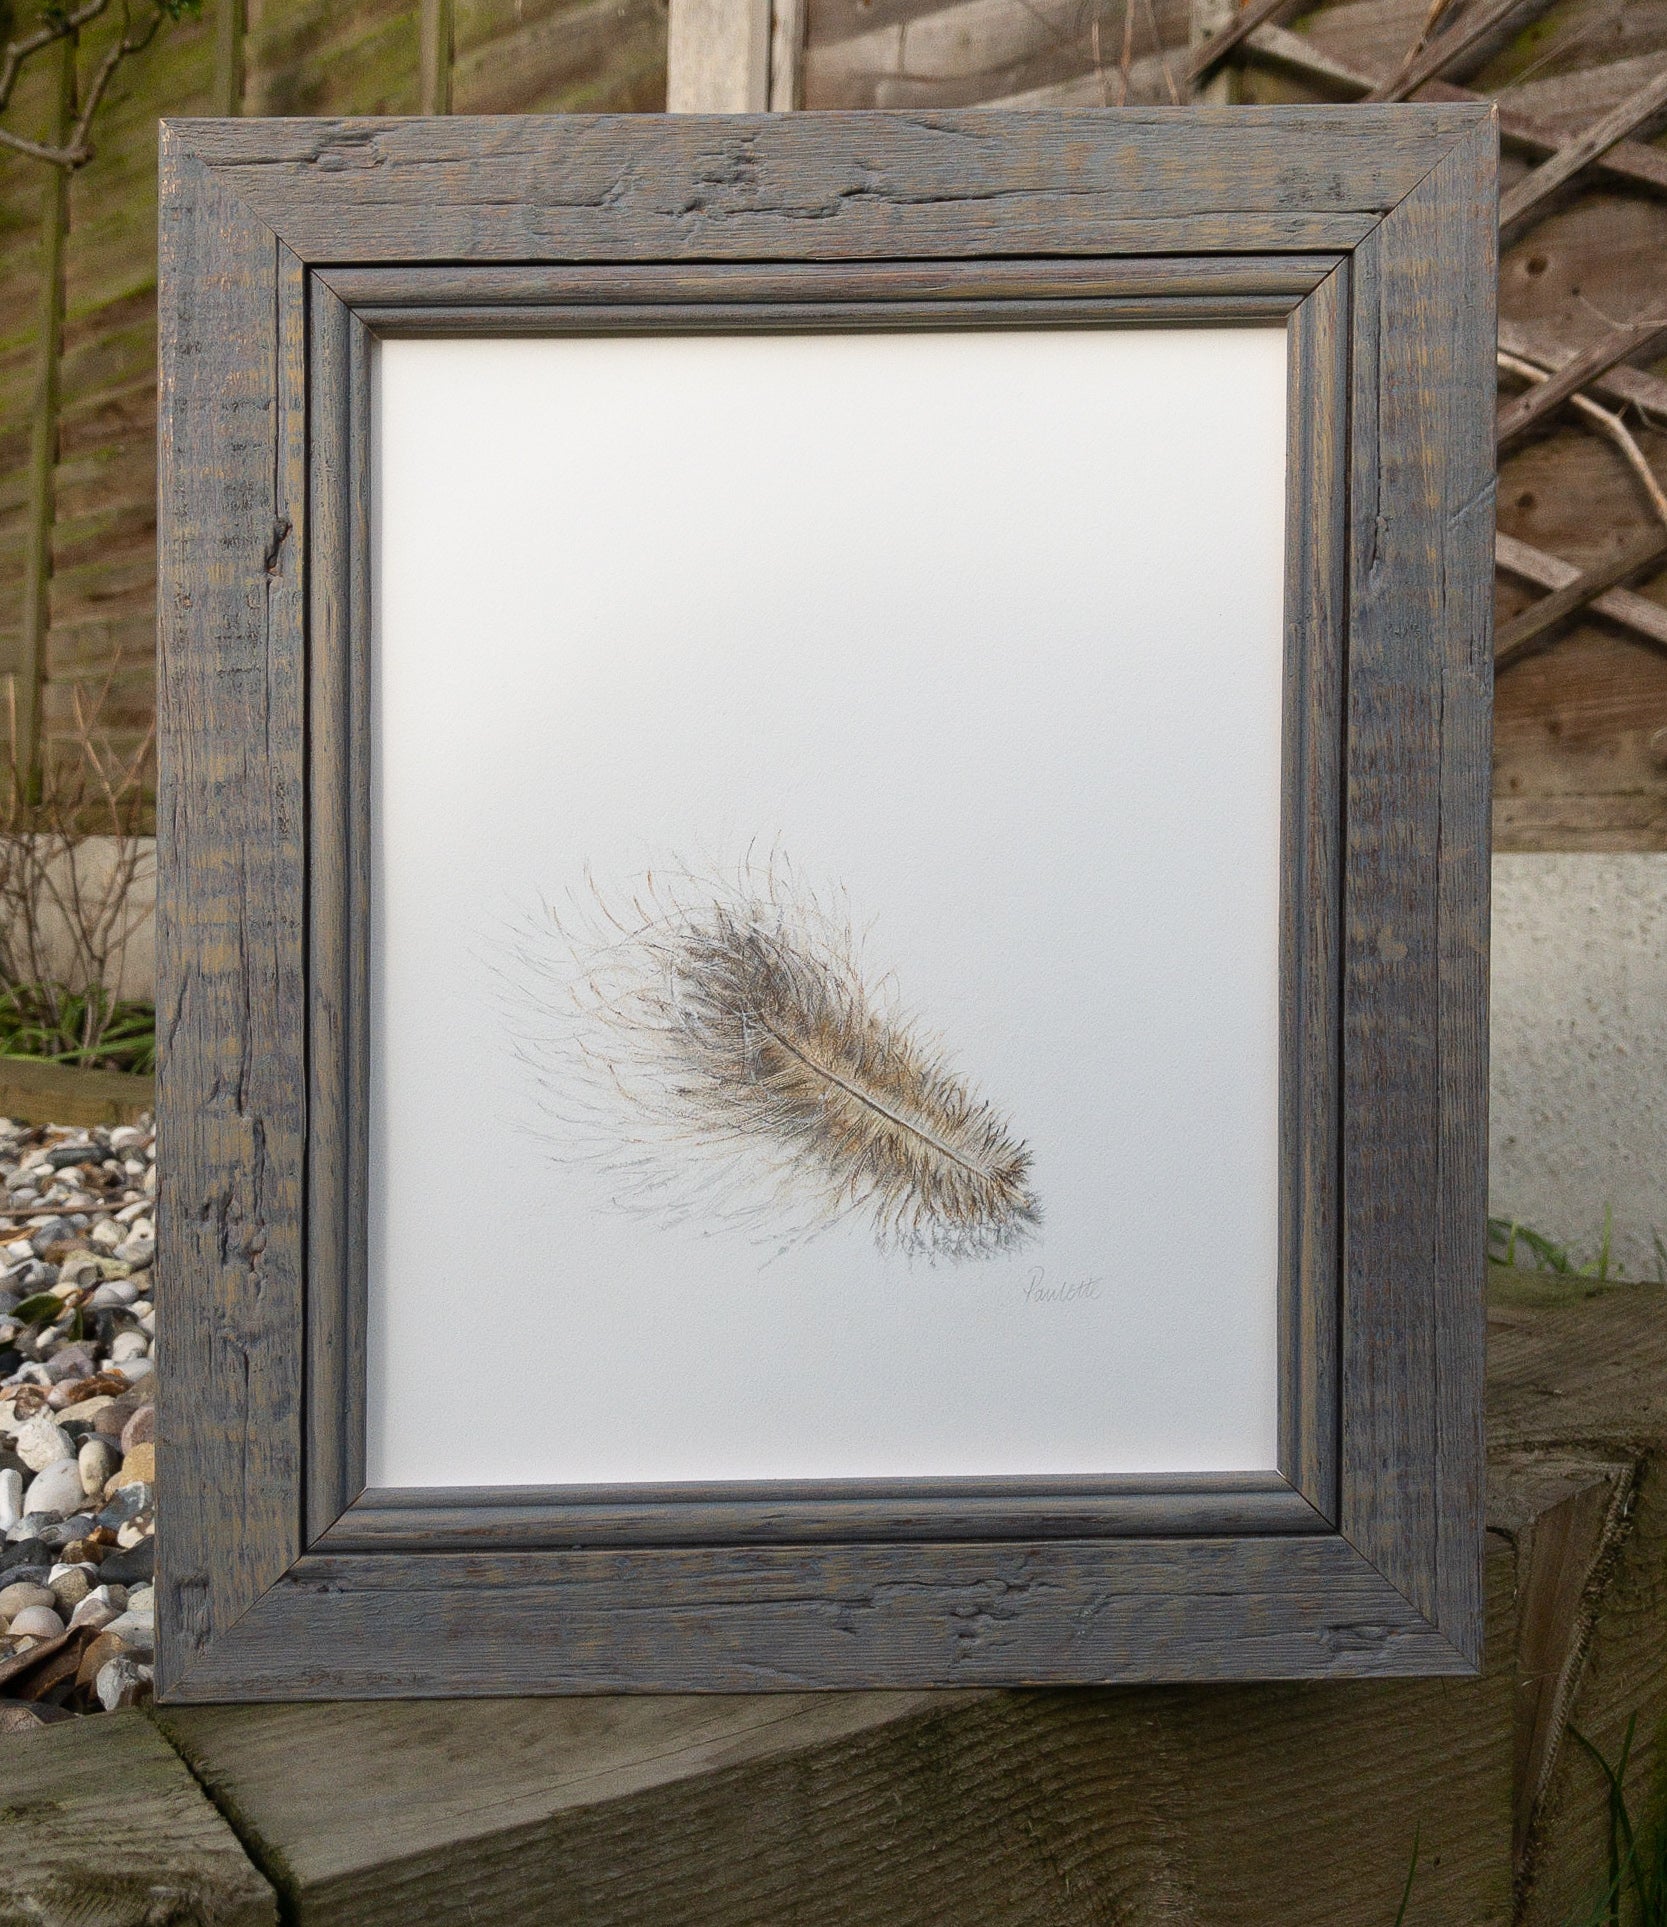 framed pencil drawing of buzzard feather